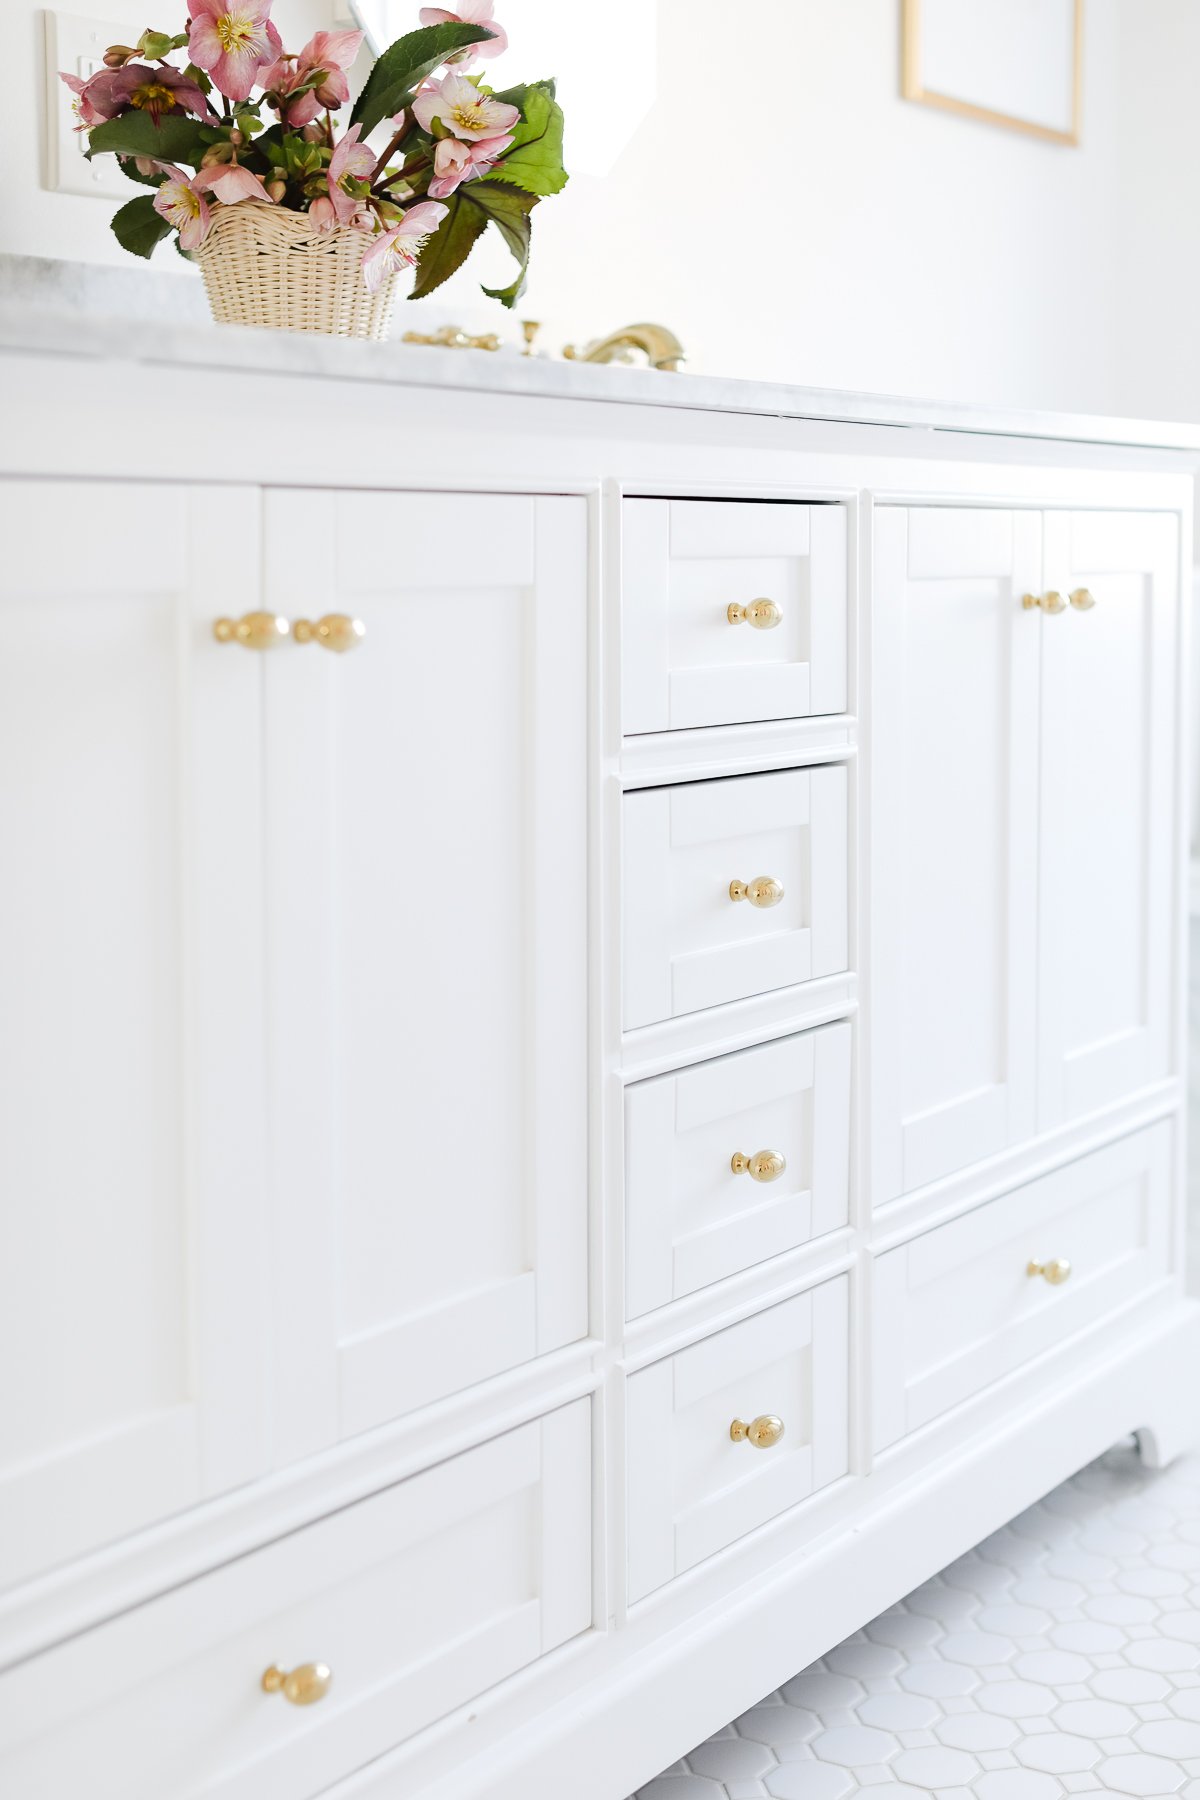 White bathroom vanity with gold handles, showcasing precise cabinet knob placement, and a basket of flowers on top.